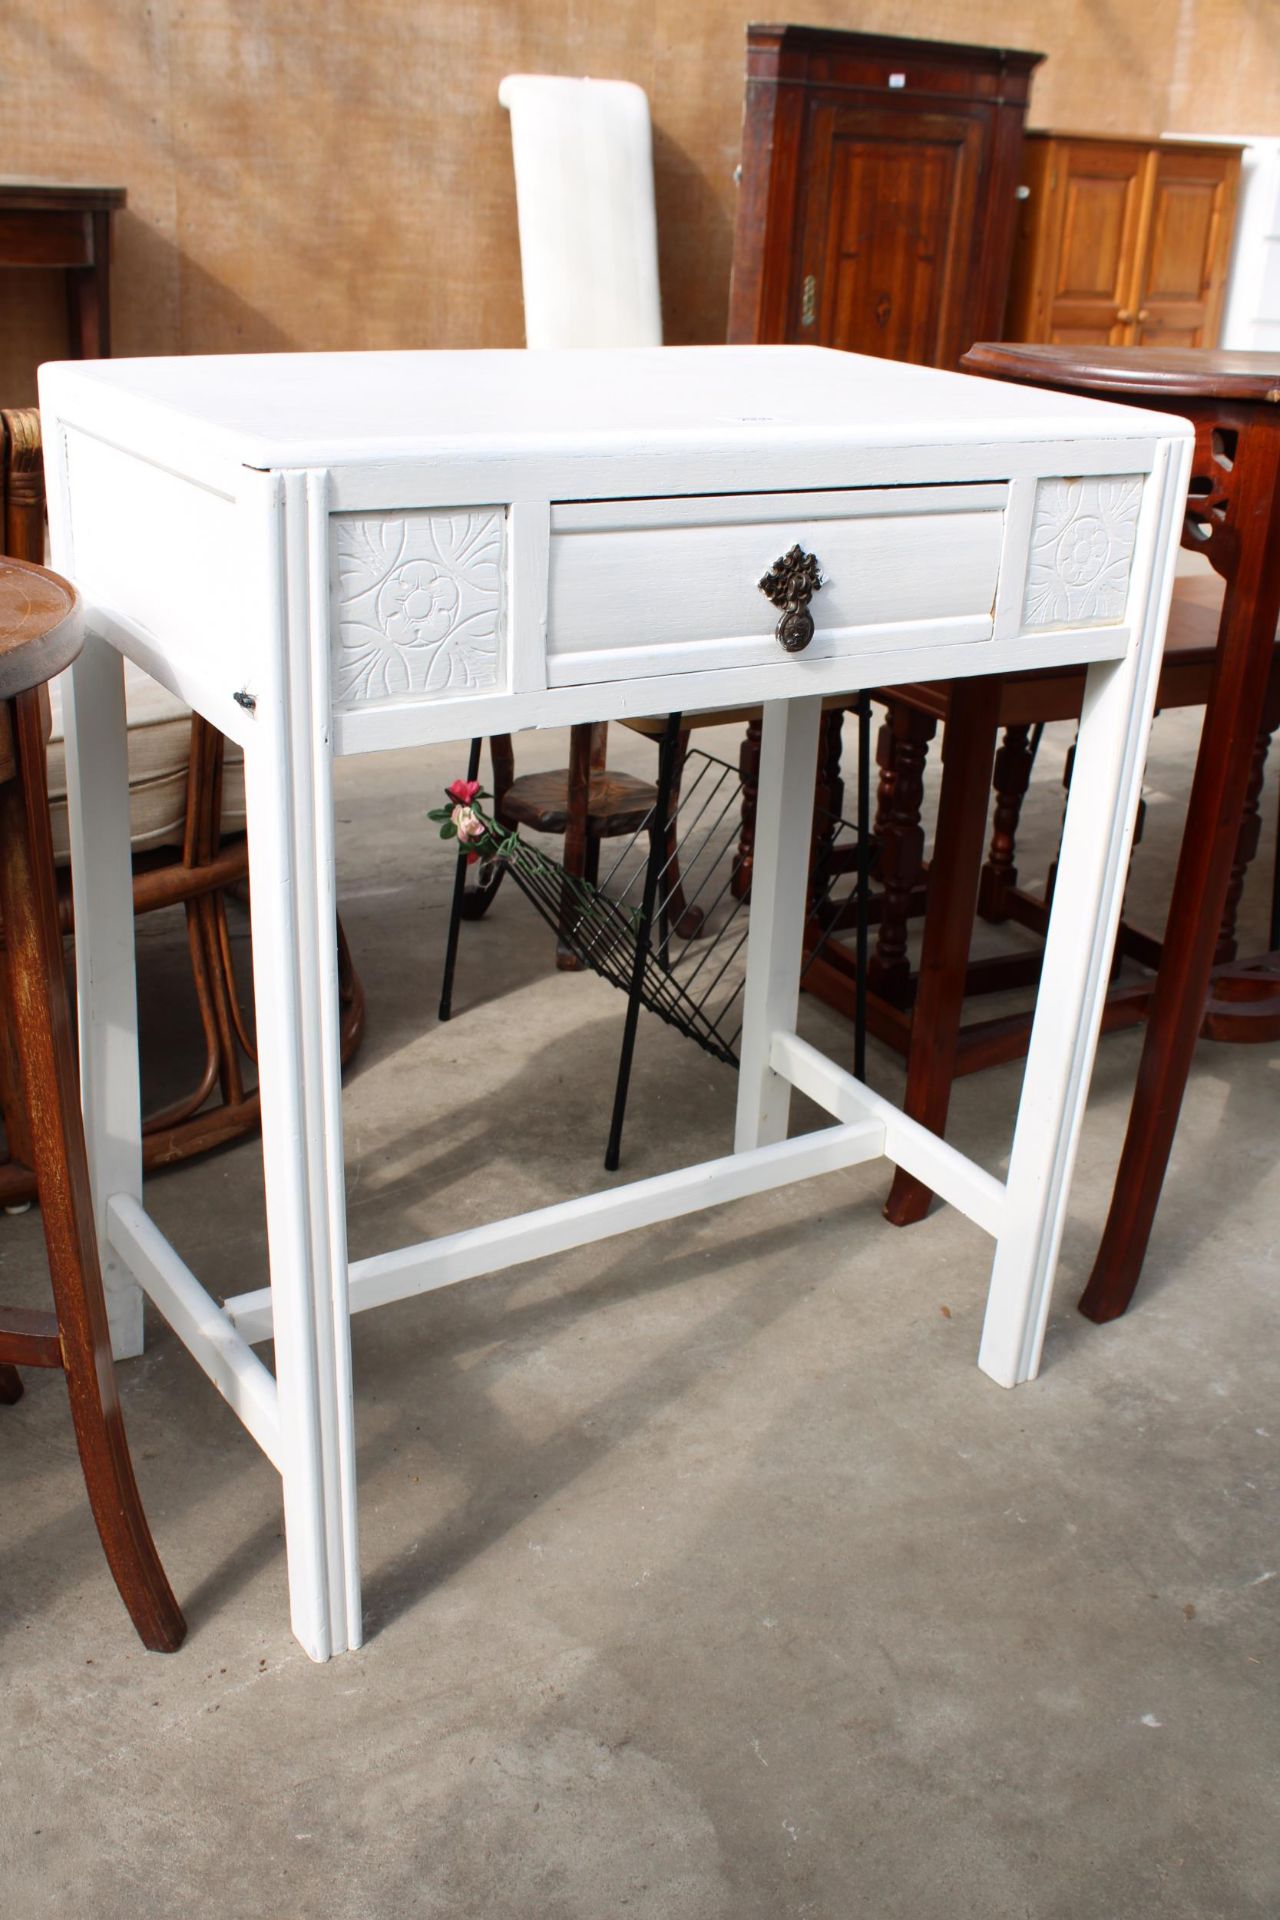 AN OAK WHITE PAINTED SIDE TABLE - Image 2 of 2